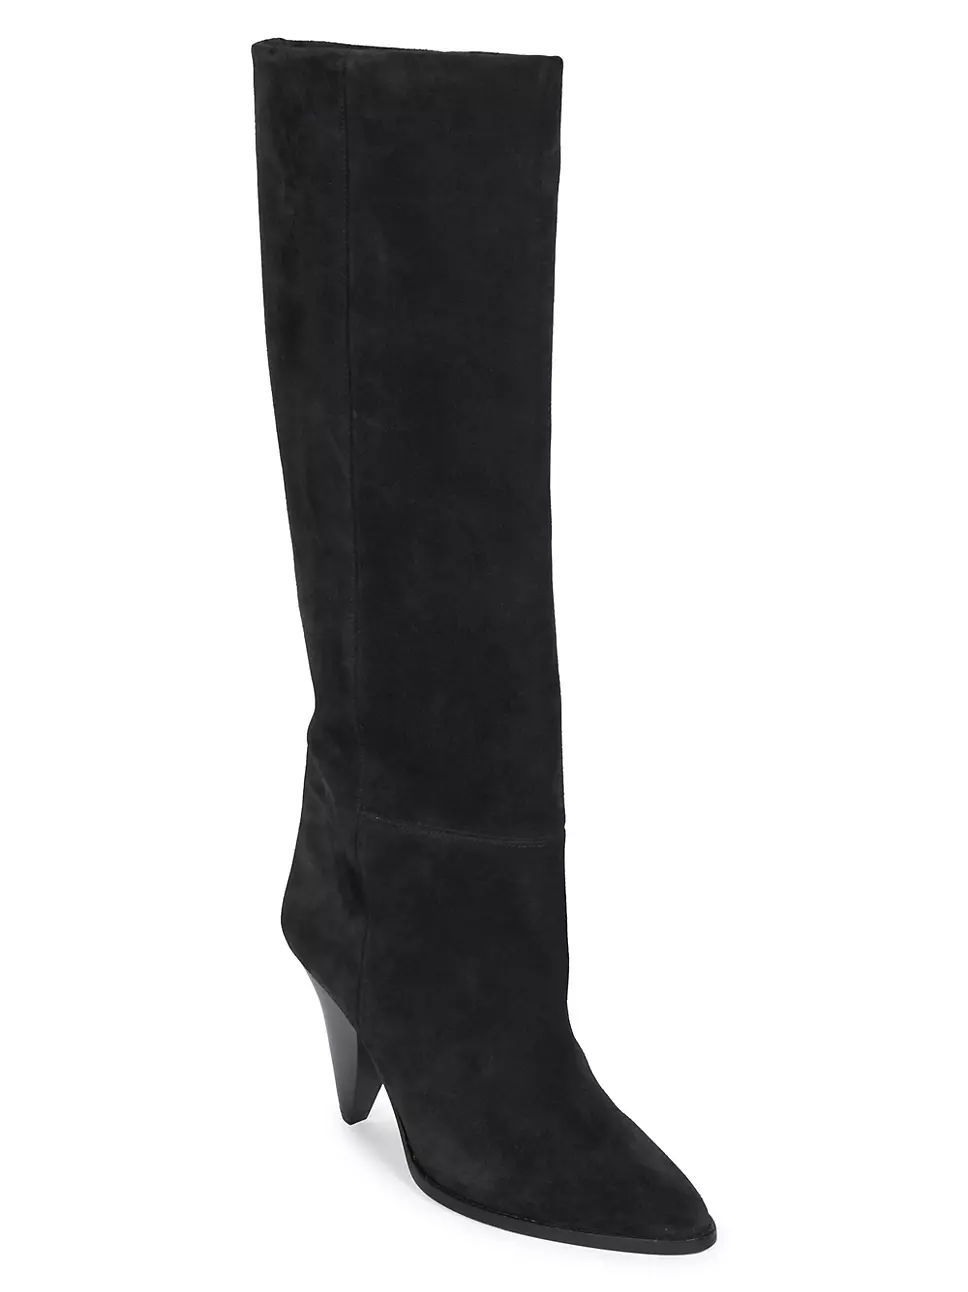 Ririo Suede Tall Boots | Saks Fifth Avenue